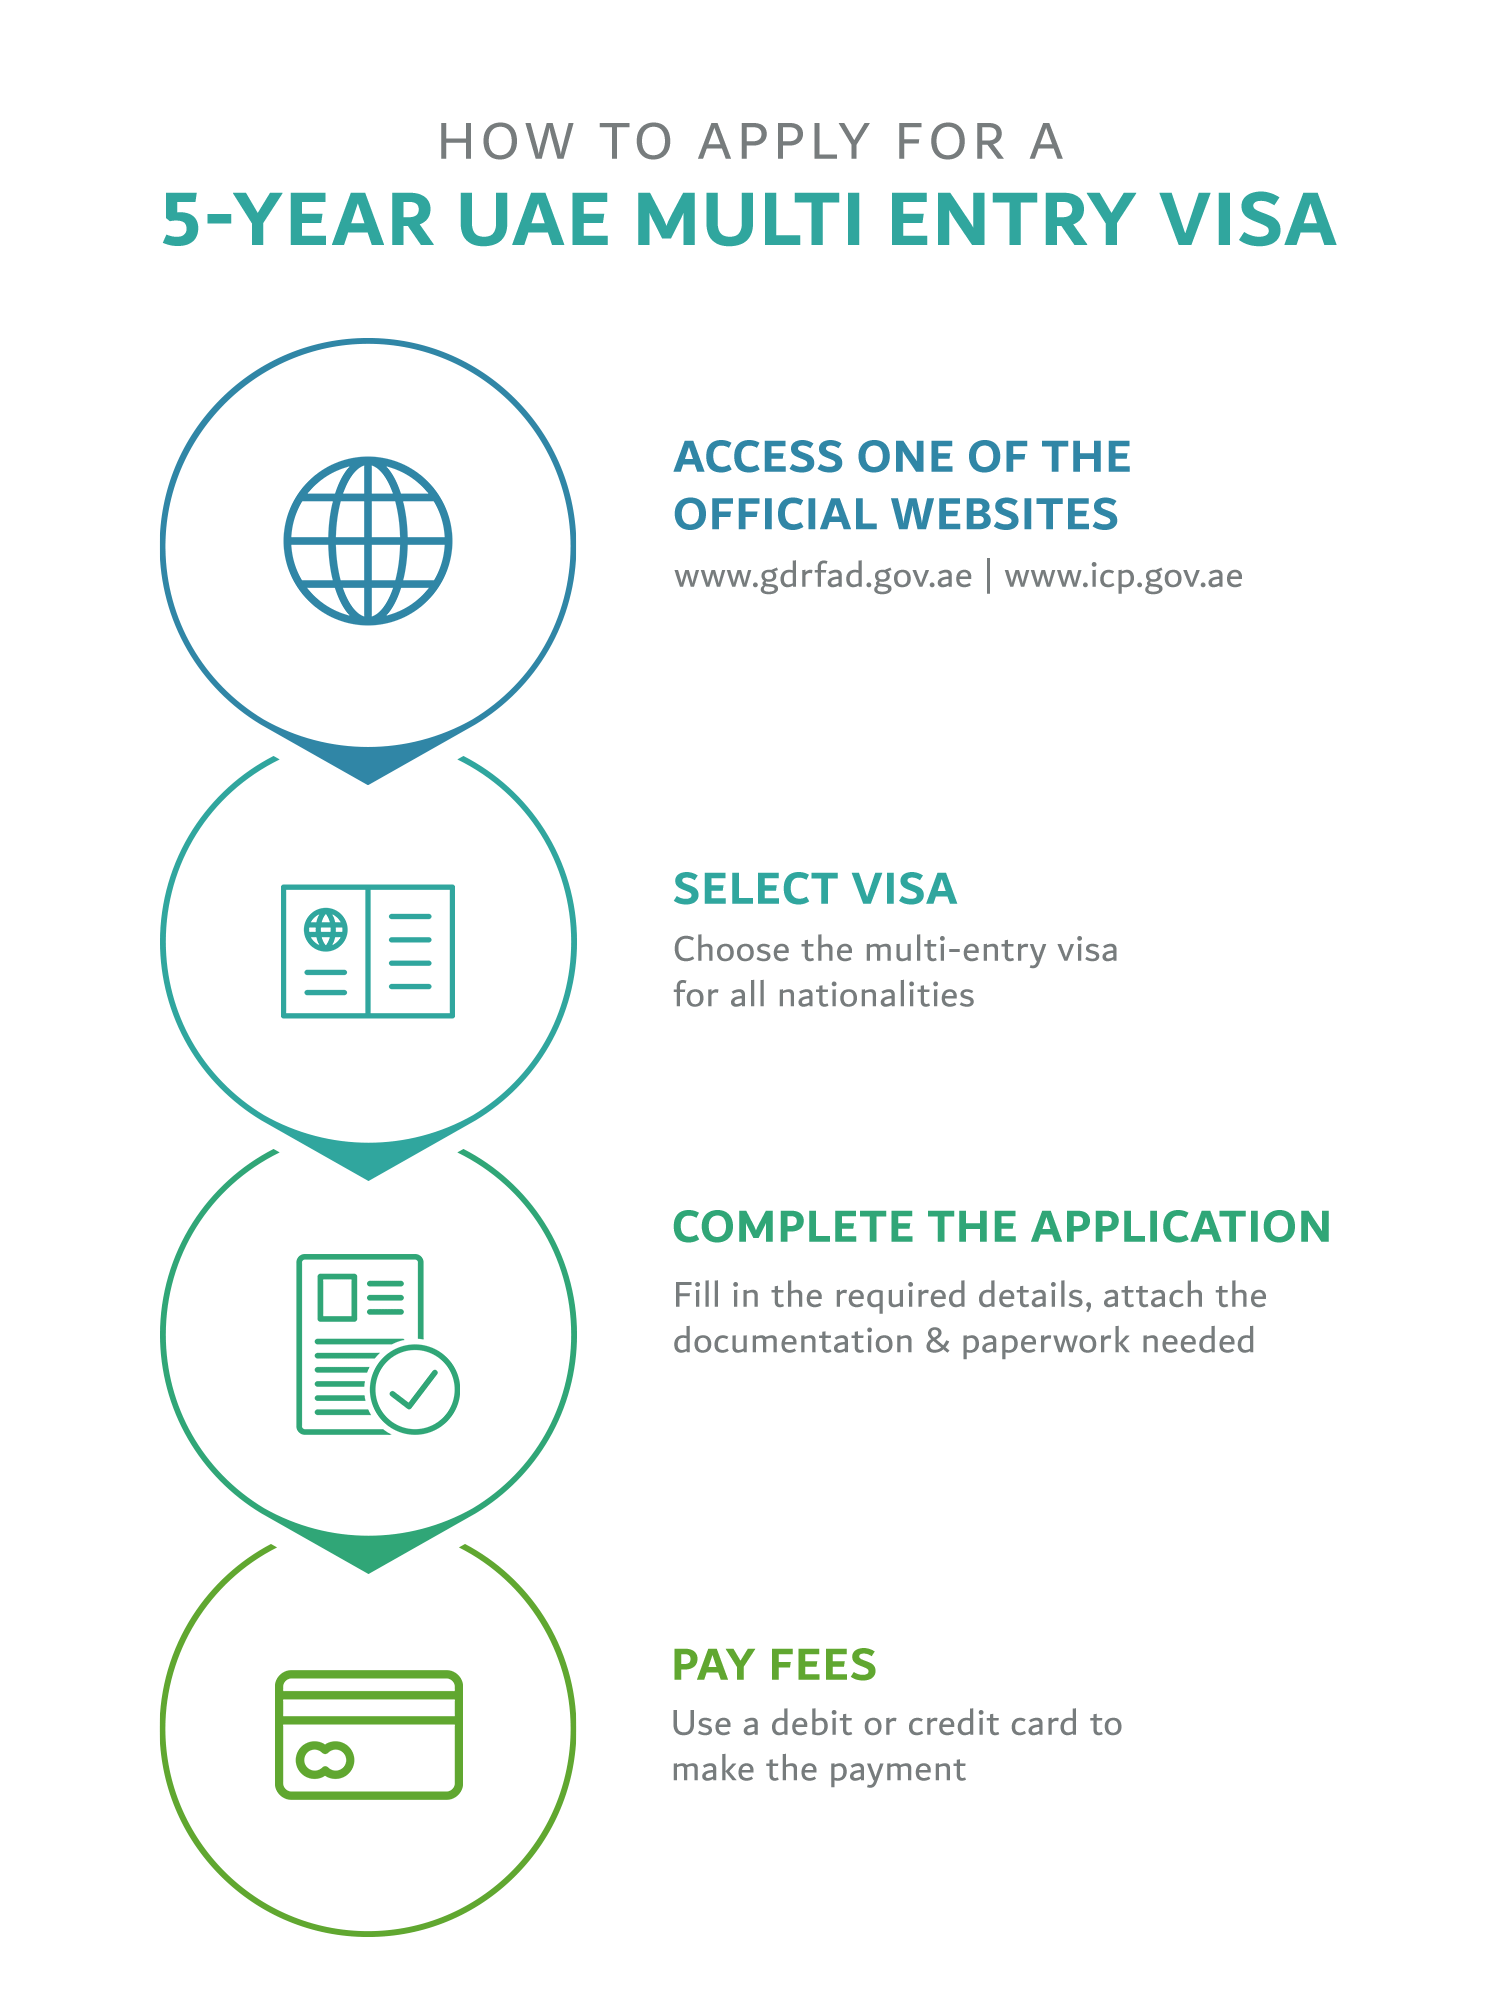 How To Apply For A 5-Year UAE Multi Entry Visa